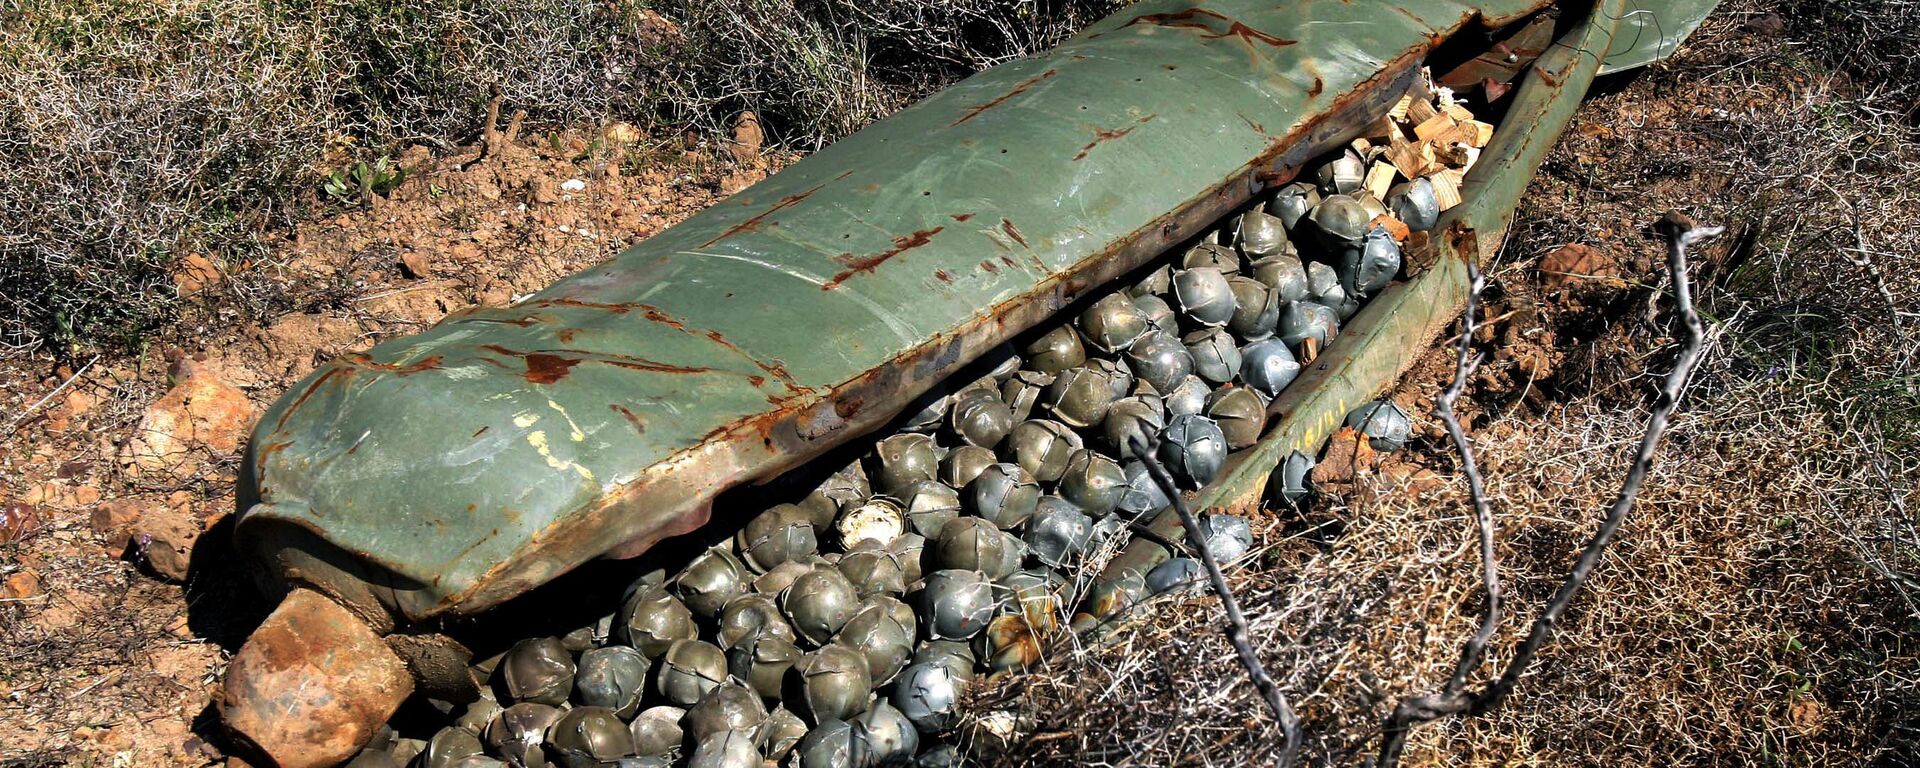 Kyiv Used Cluster Bombs On Border Village: Russian Governor